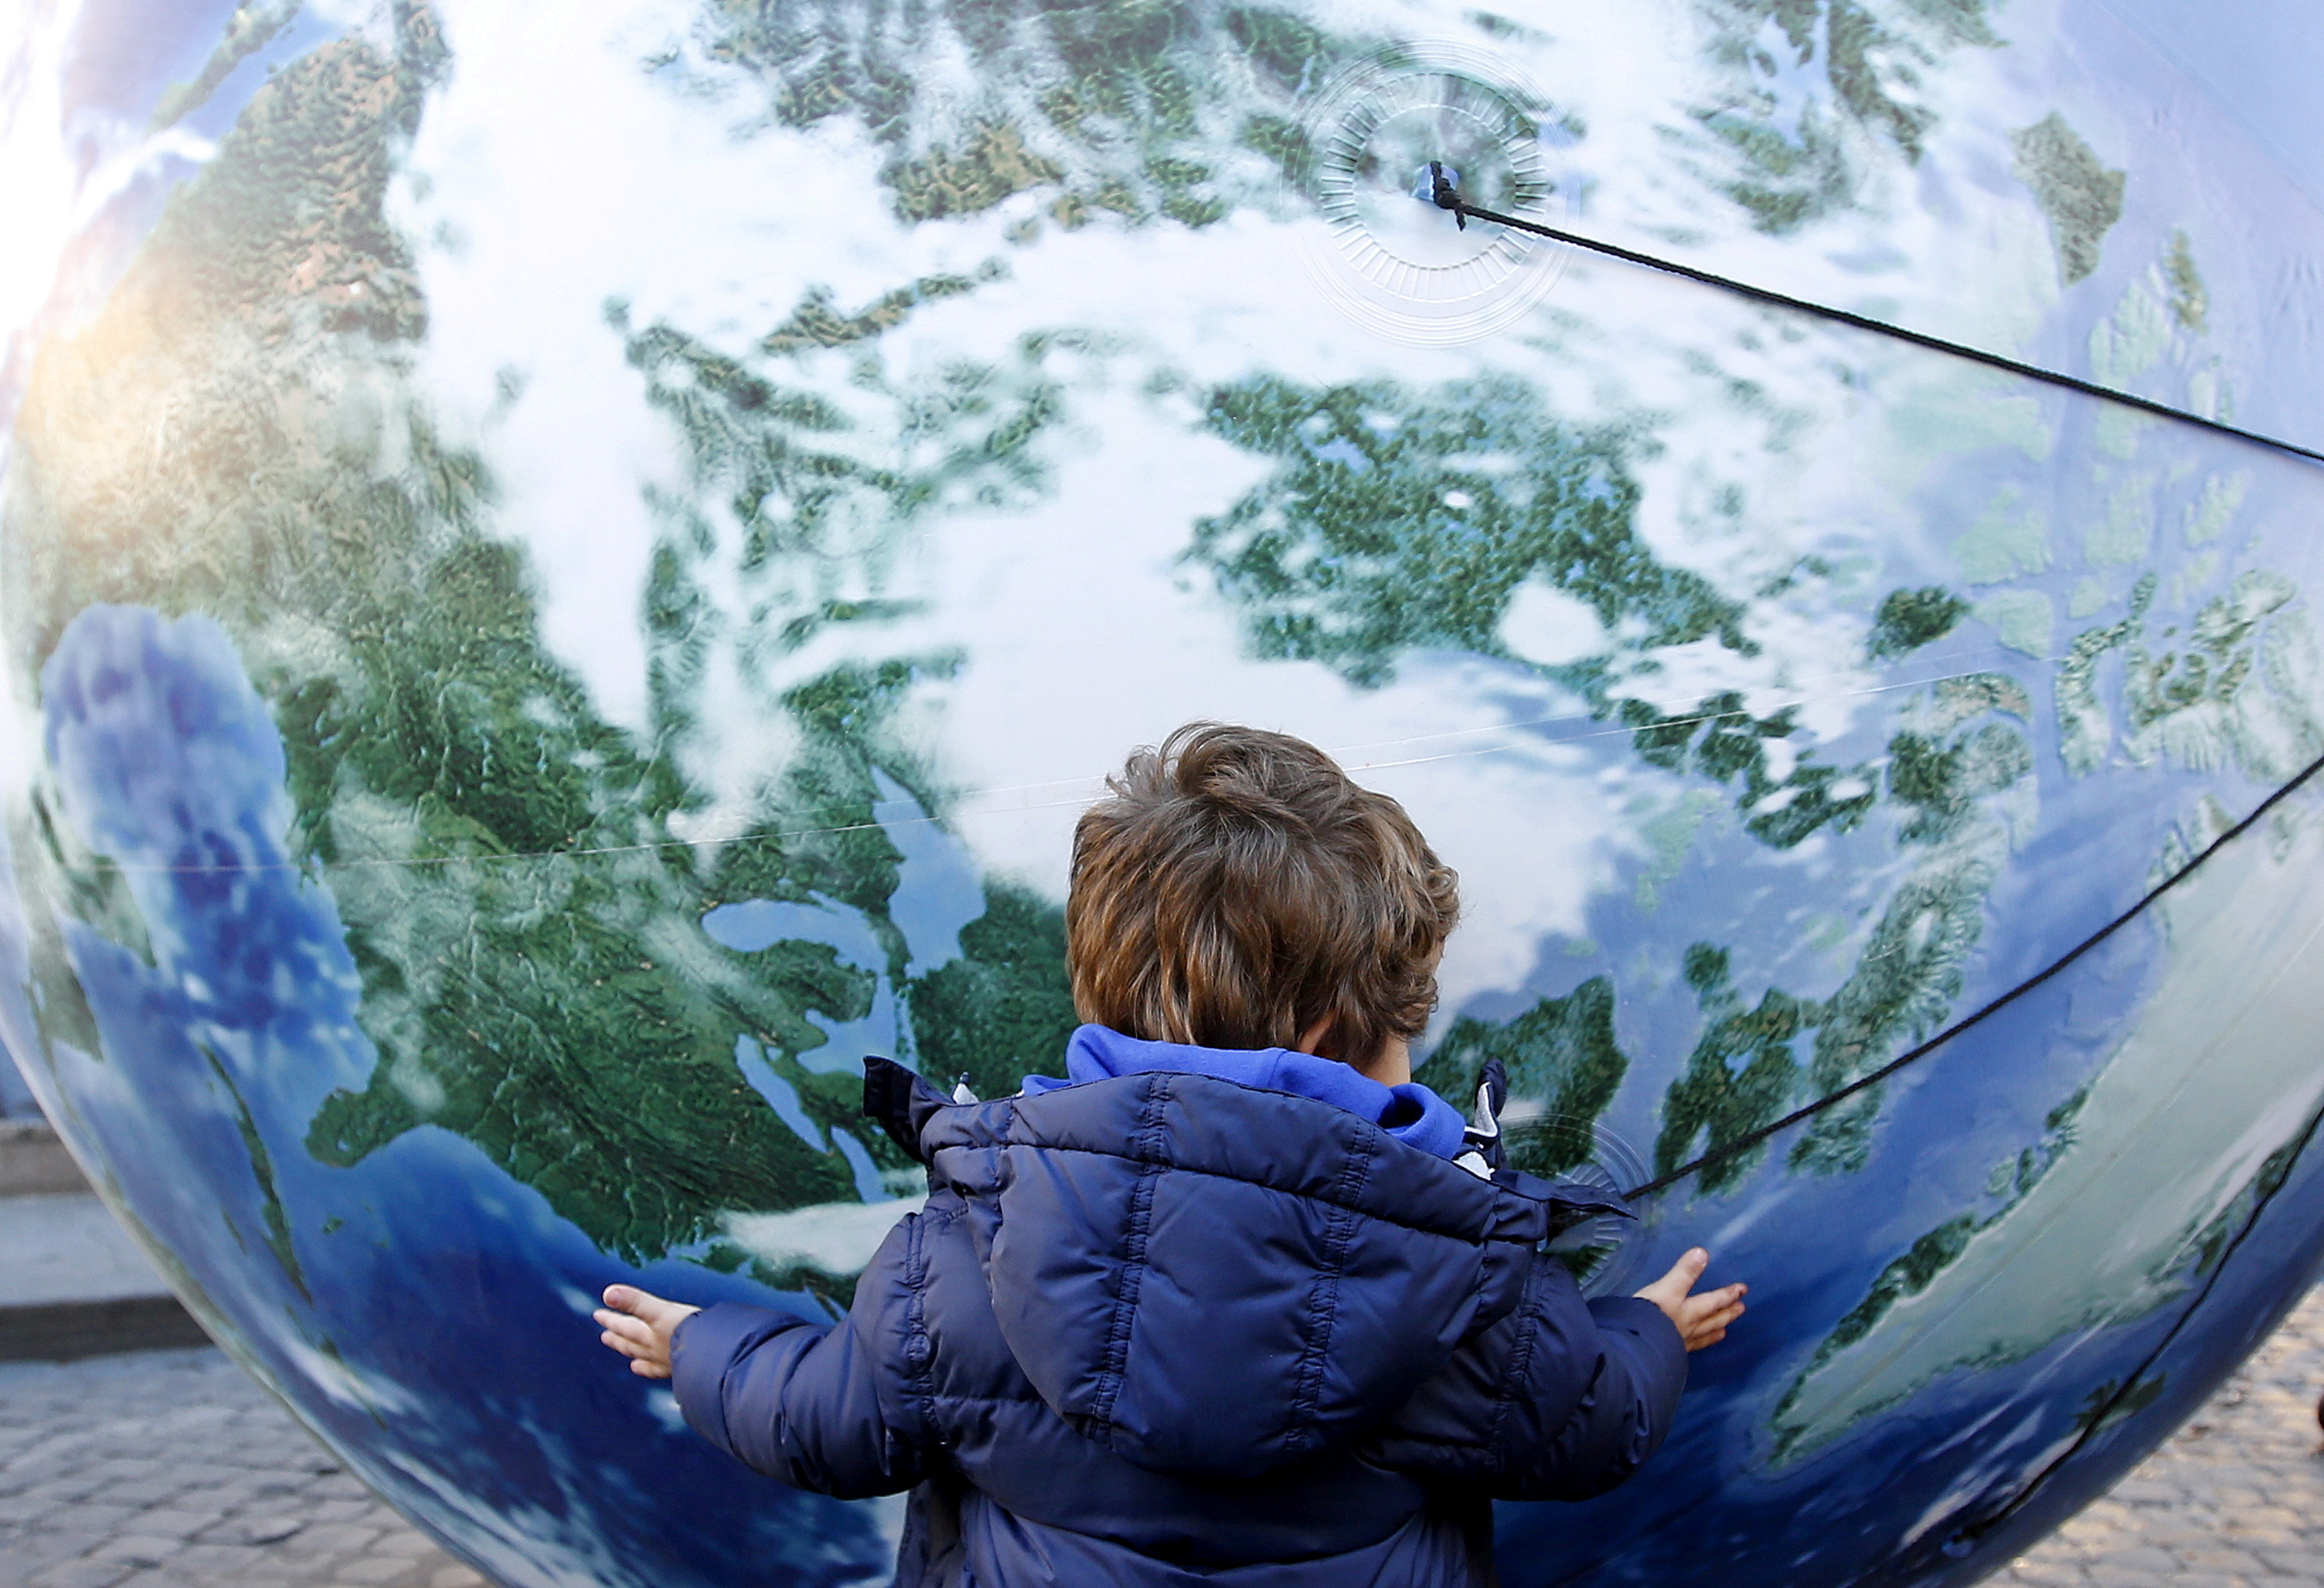 A child embraces a globe shaped balloon during a rally held ahead of the start of the 2015 Paris World Climate Change Conference, known as the COP21 summit, in Rome